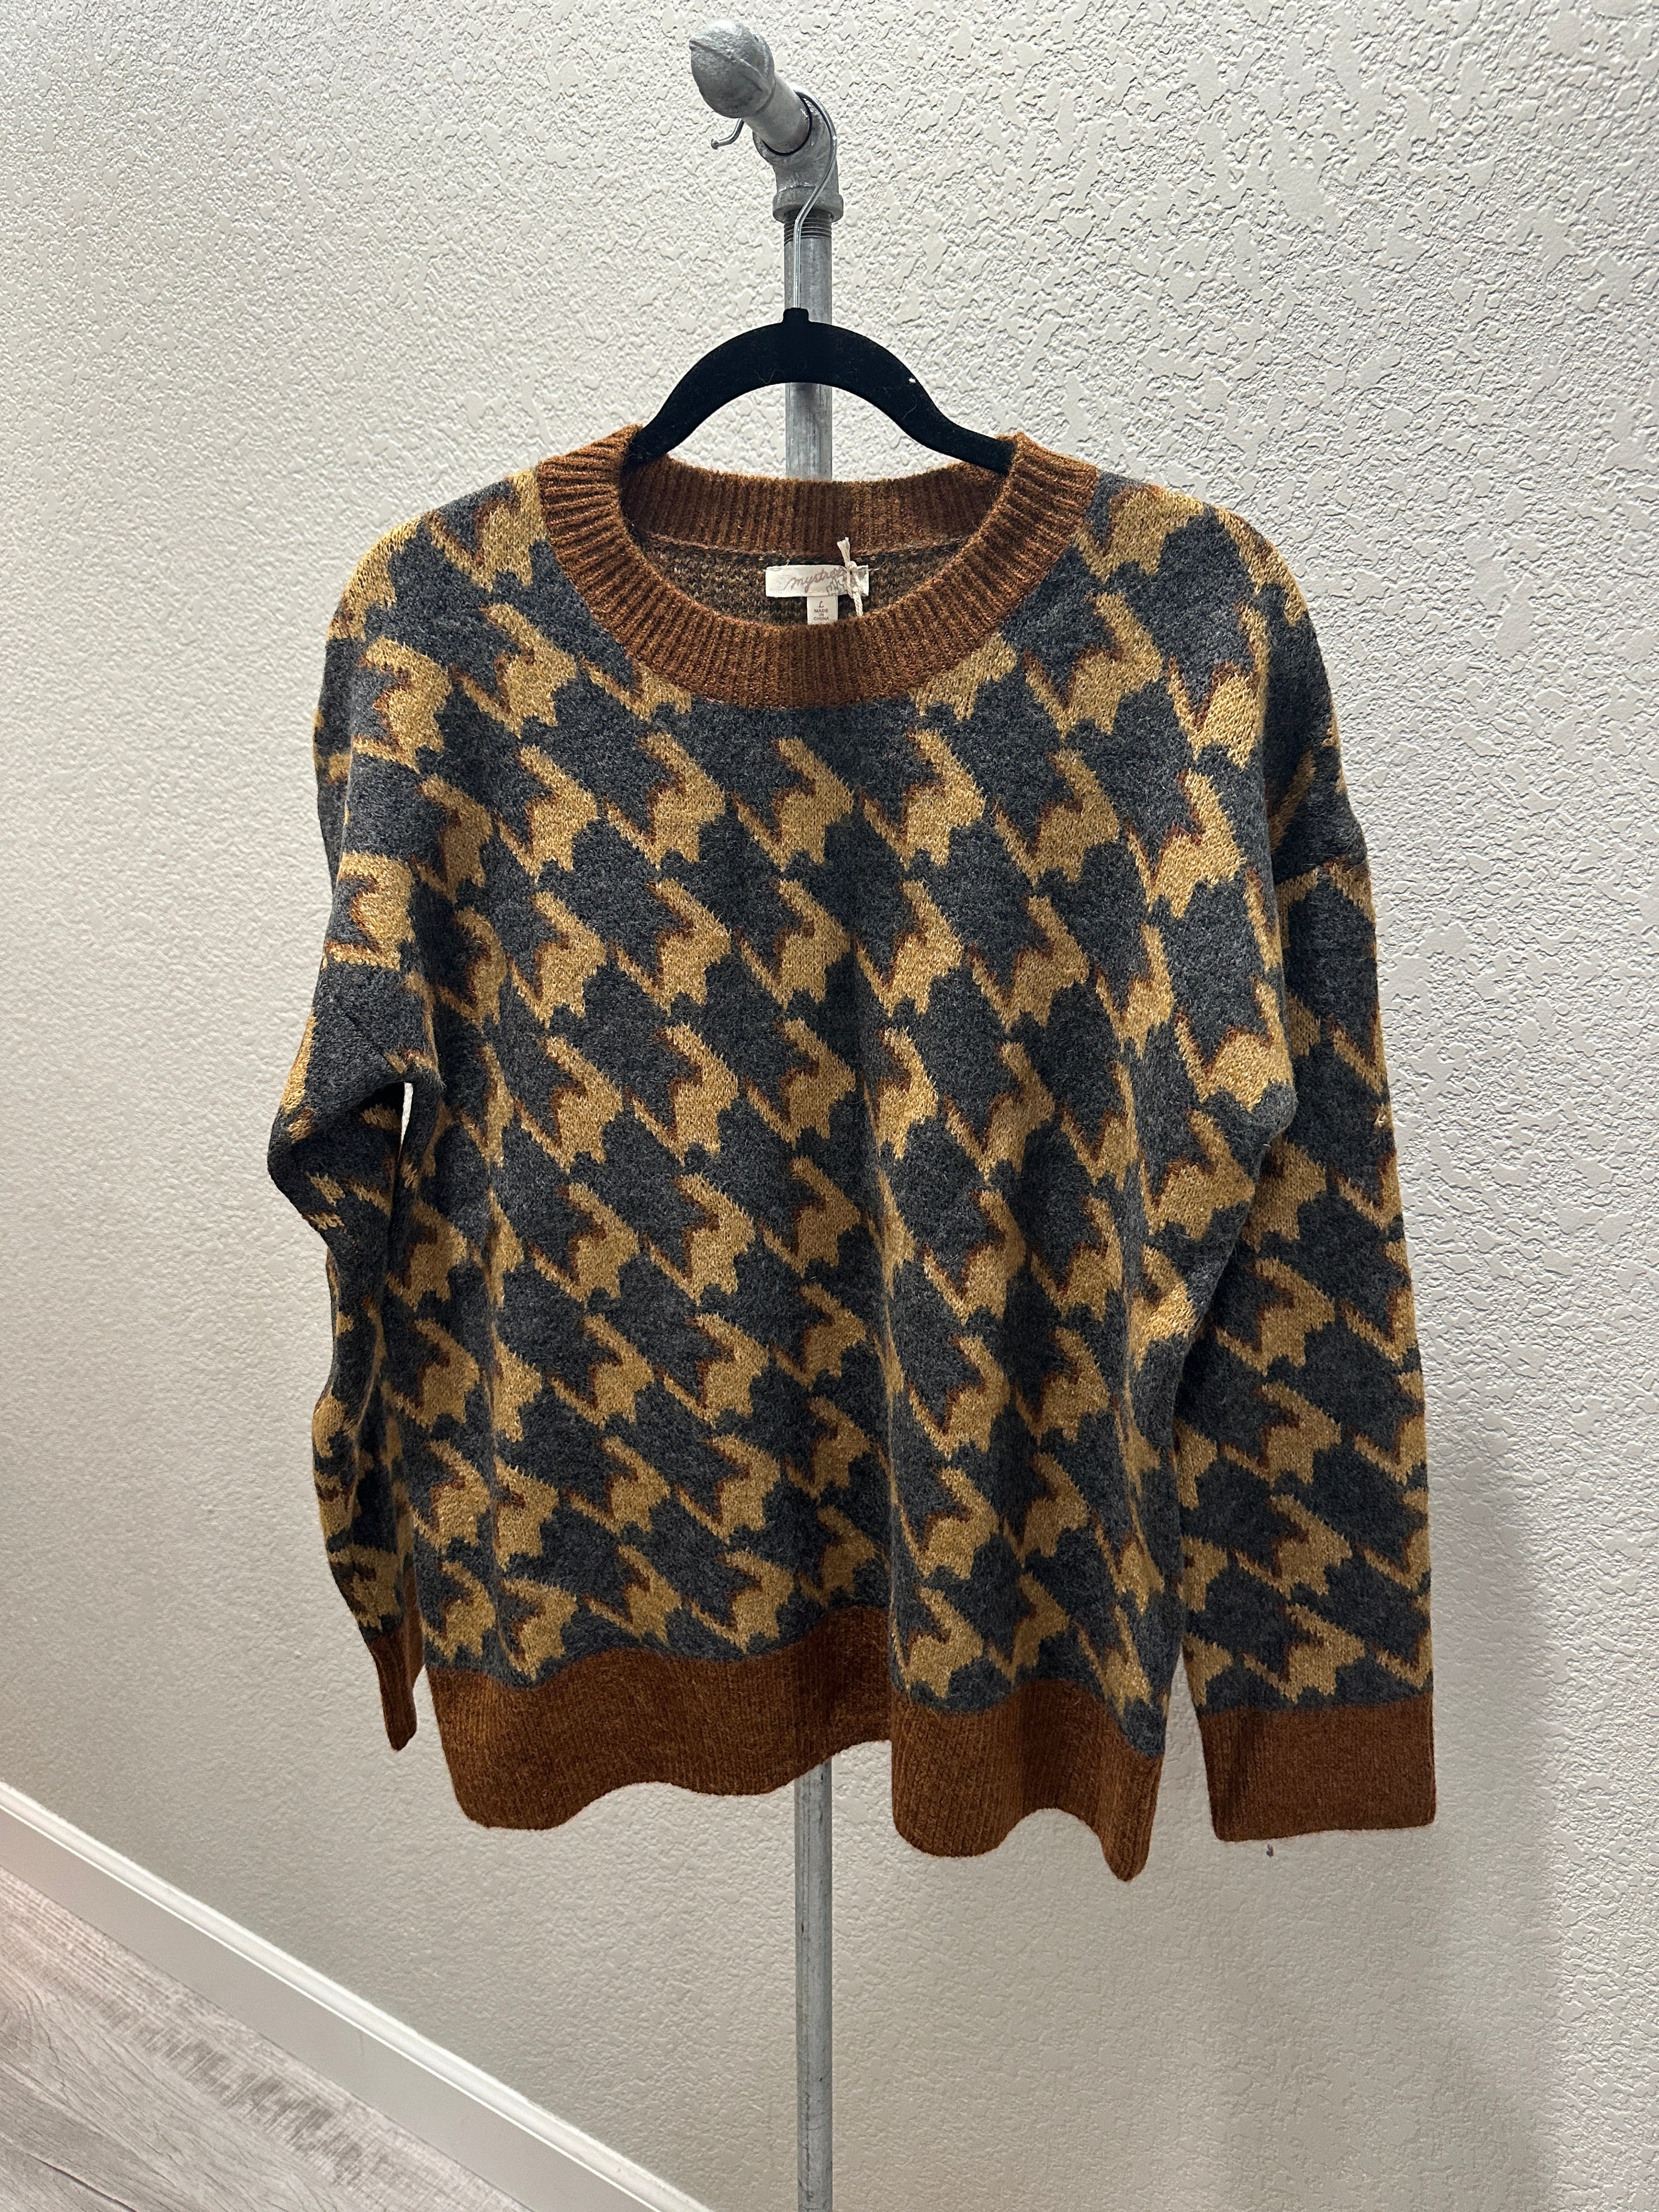 Houndstooth Brown & Charcoal Crewneck Sweater